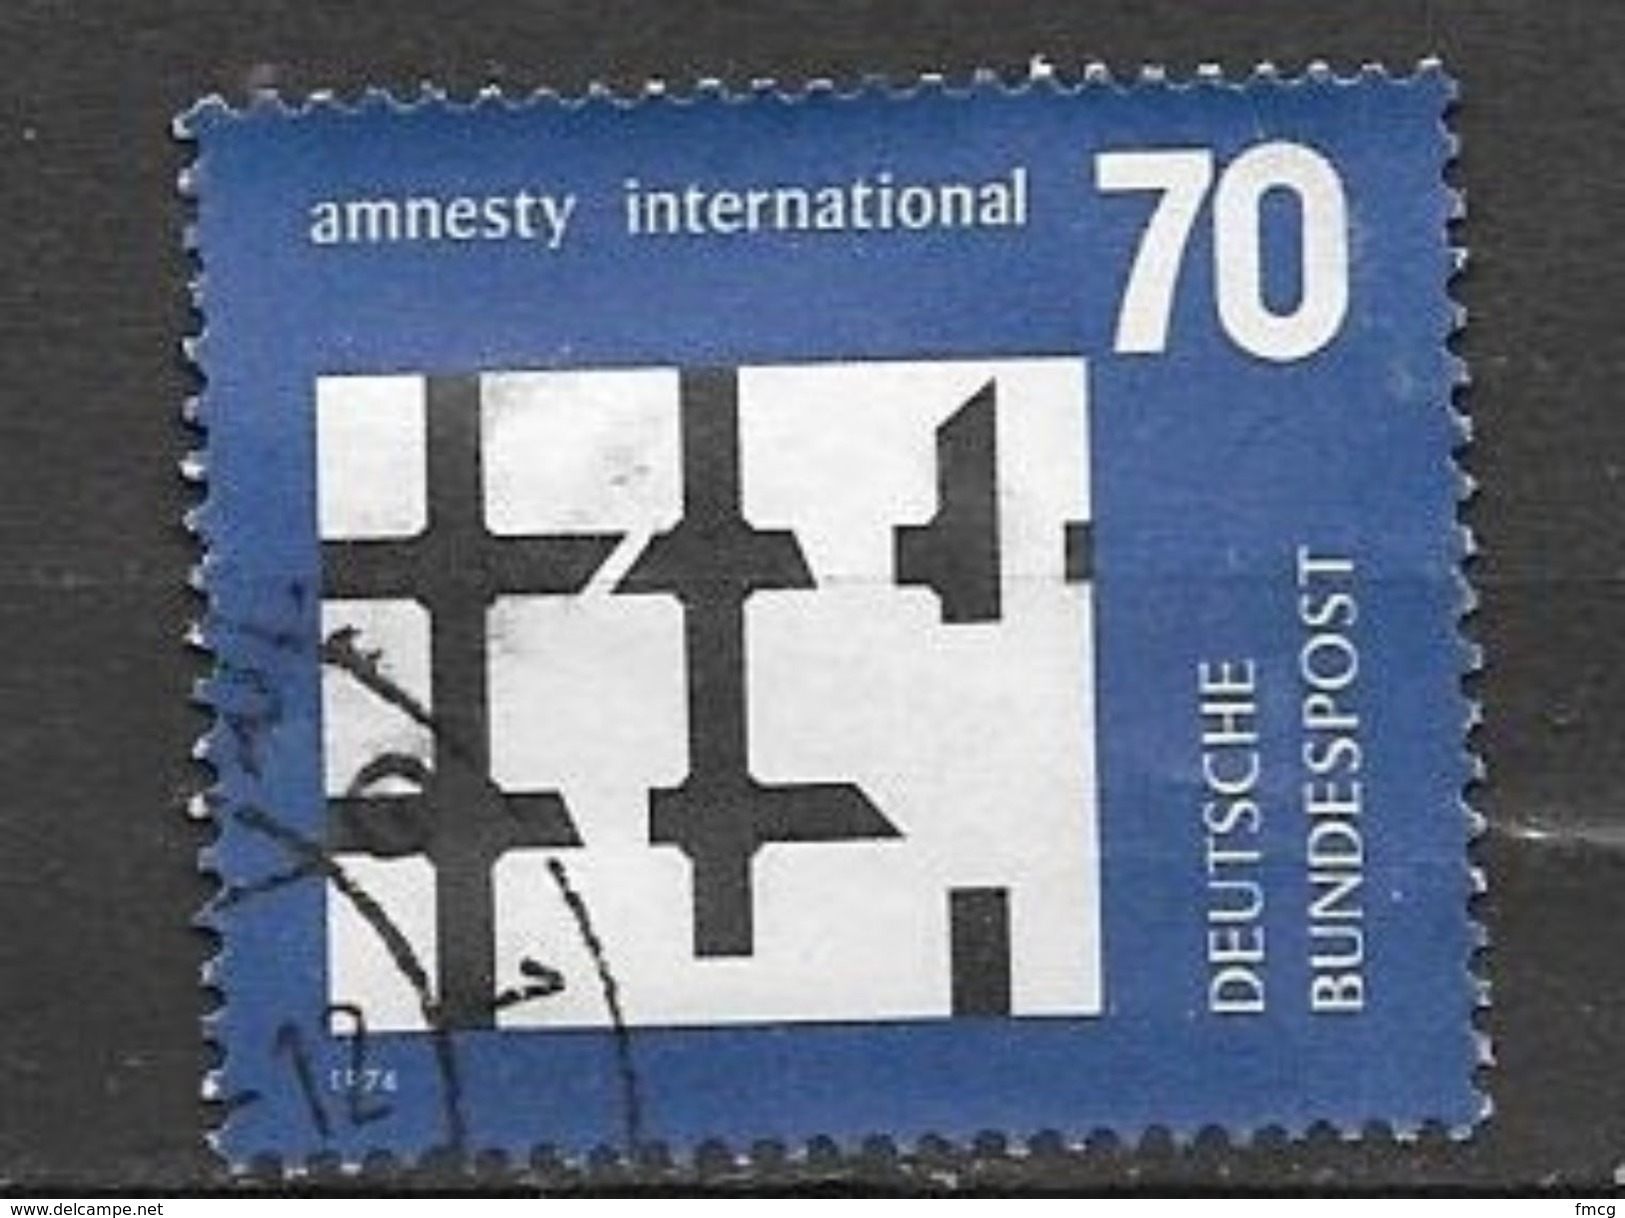 1974 70pf Anesty International, Used - Used Stamps